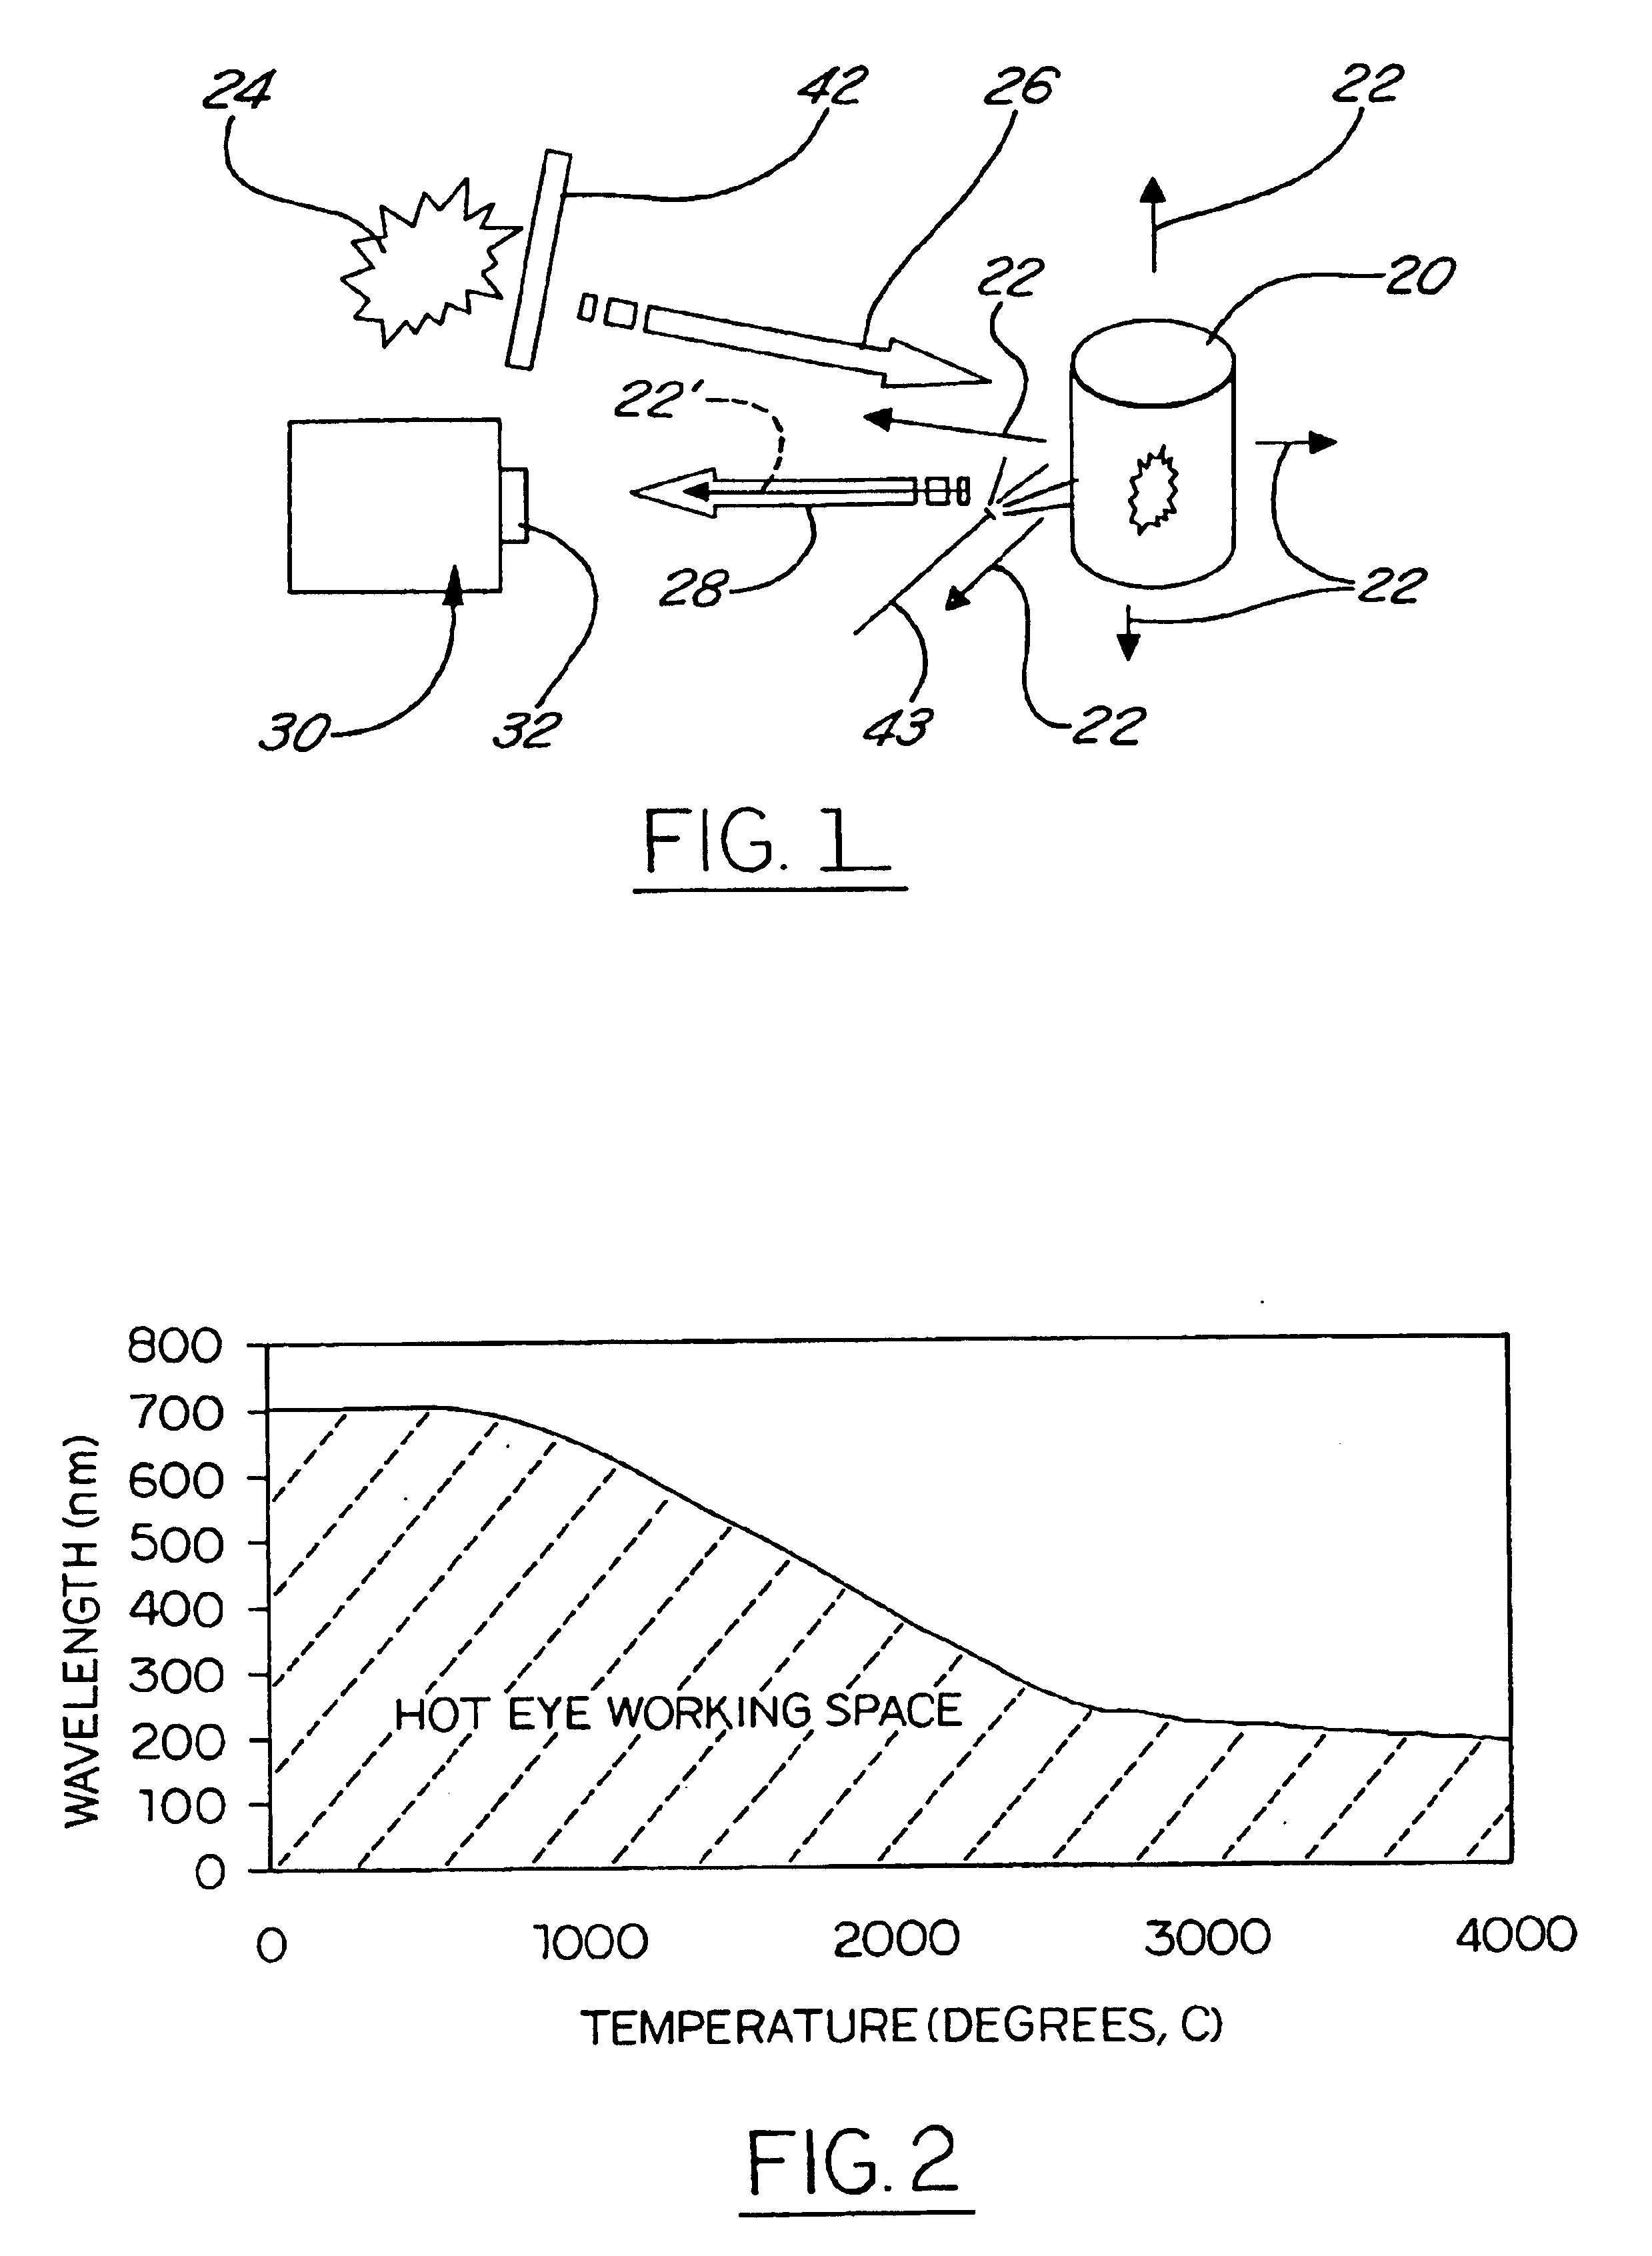 Optical observation device and method for observing articles at elevated temperatures